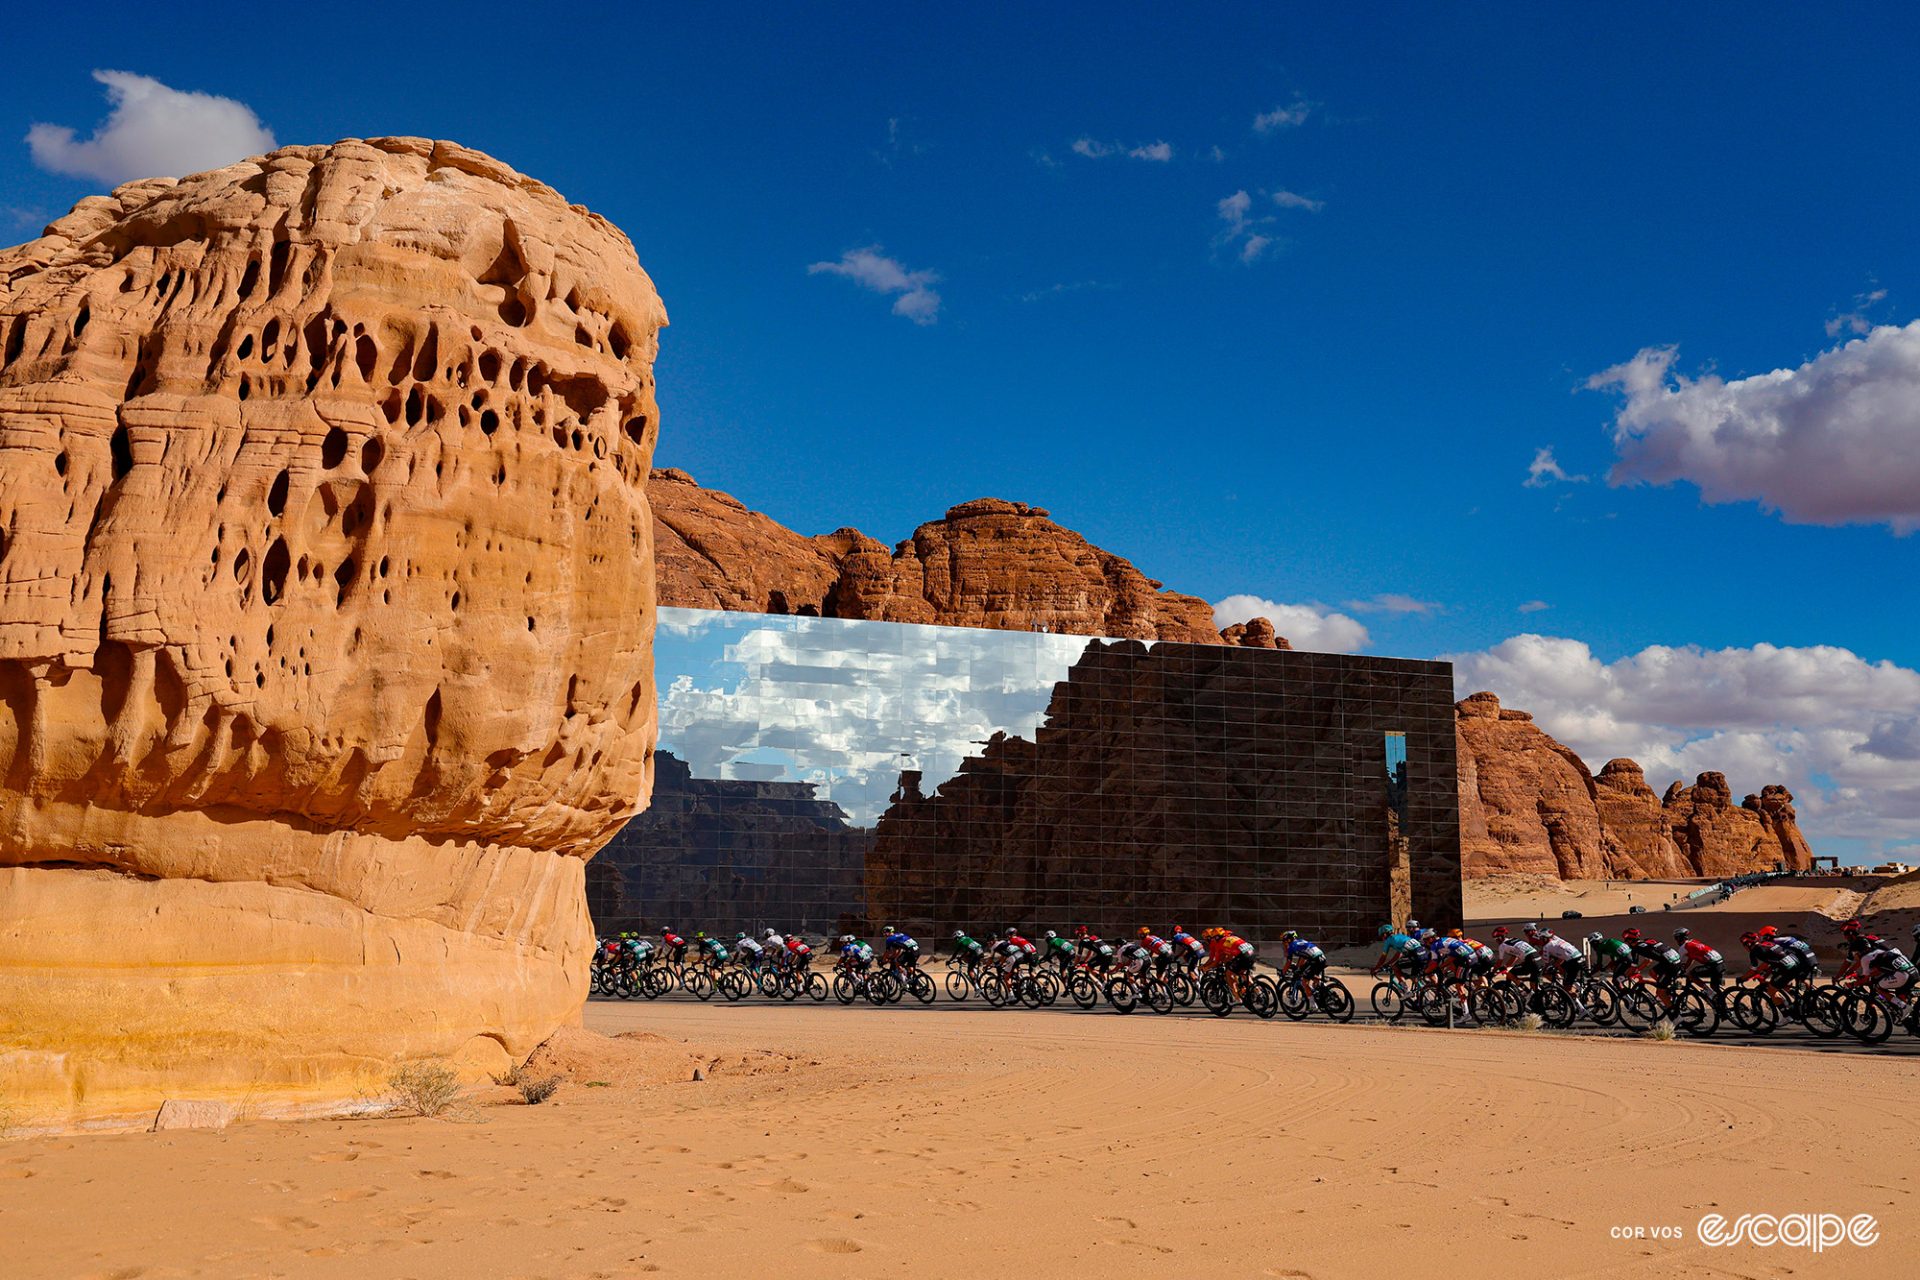 The peloton zips past the Maraya Concert Hall at the recent AlUla Tour, the largest mirrored building in the world.